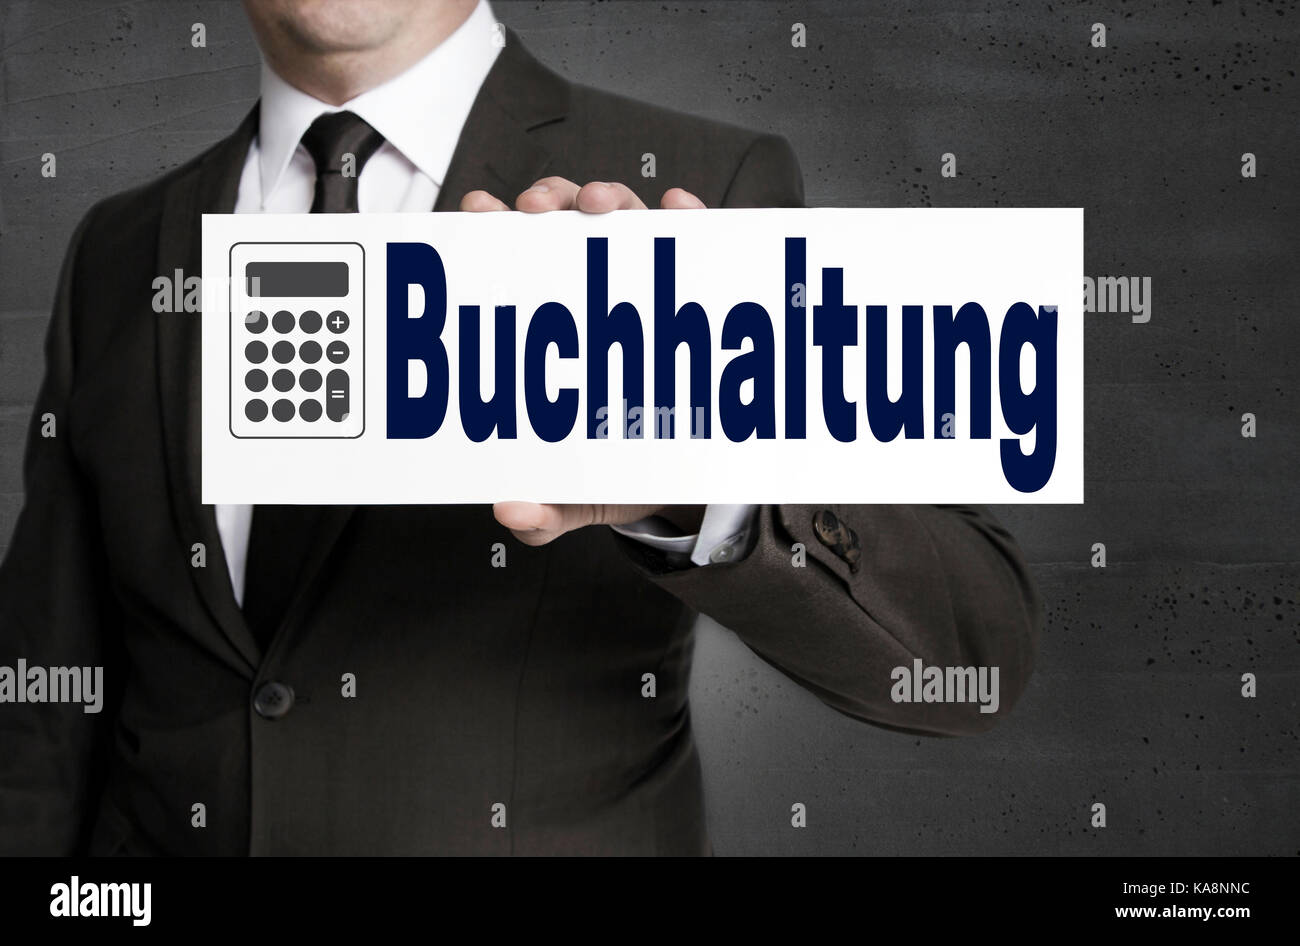 Buchhaltung (in german Accounting) signboard is held by businessman. Stock Photo